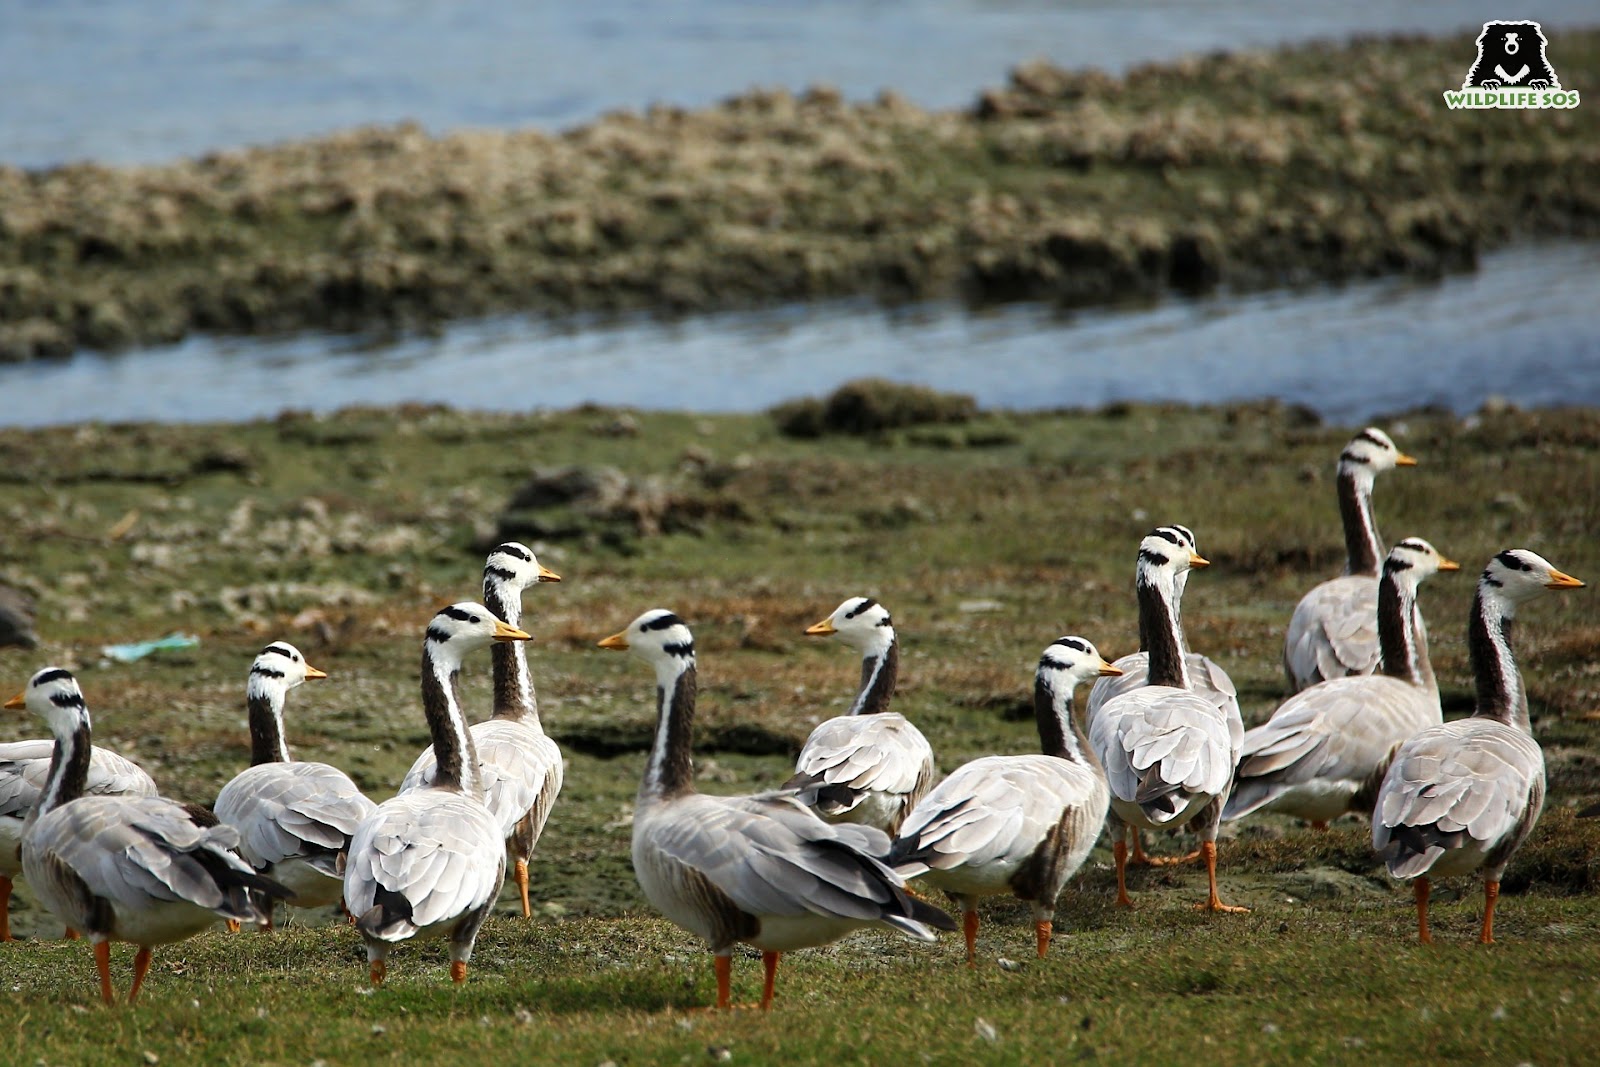 bar headed geese are migratory birds